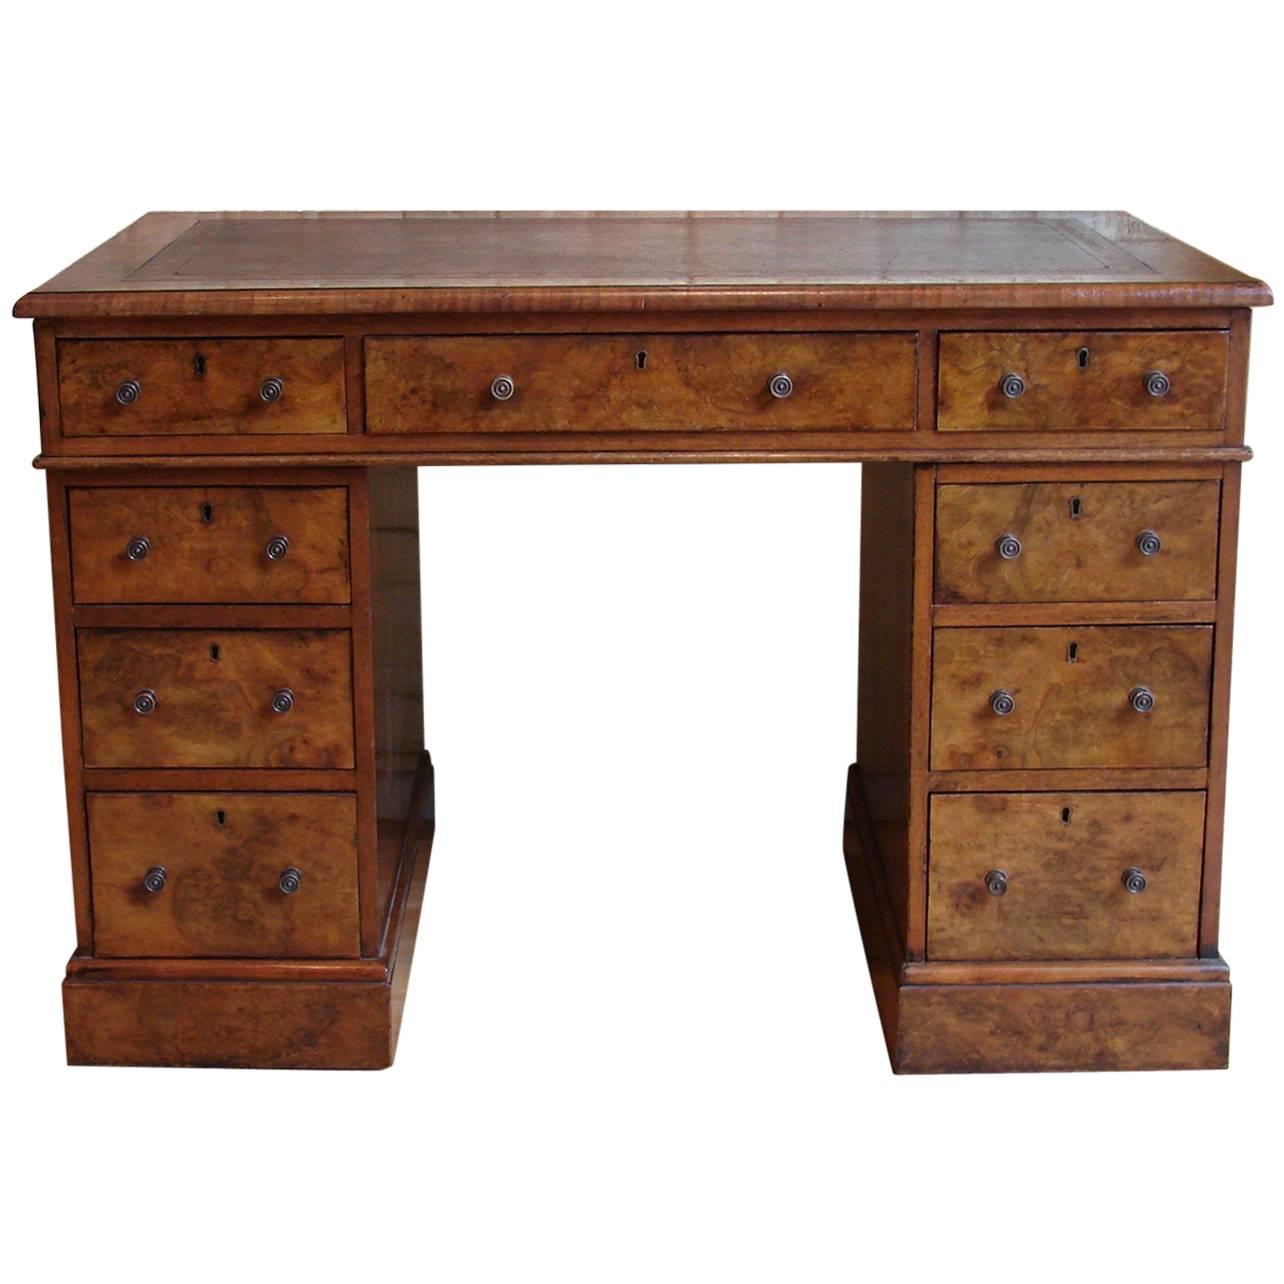 Attractive Small English Burl Walnut Pedestal Desk with Tooled Leather Top